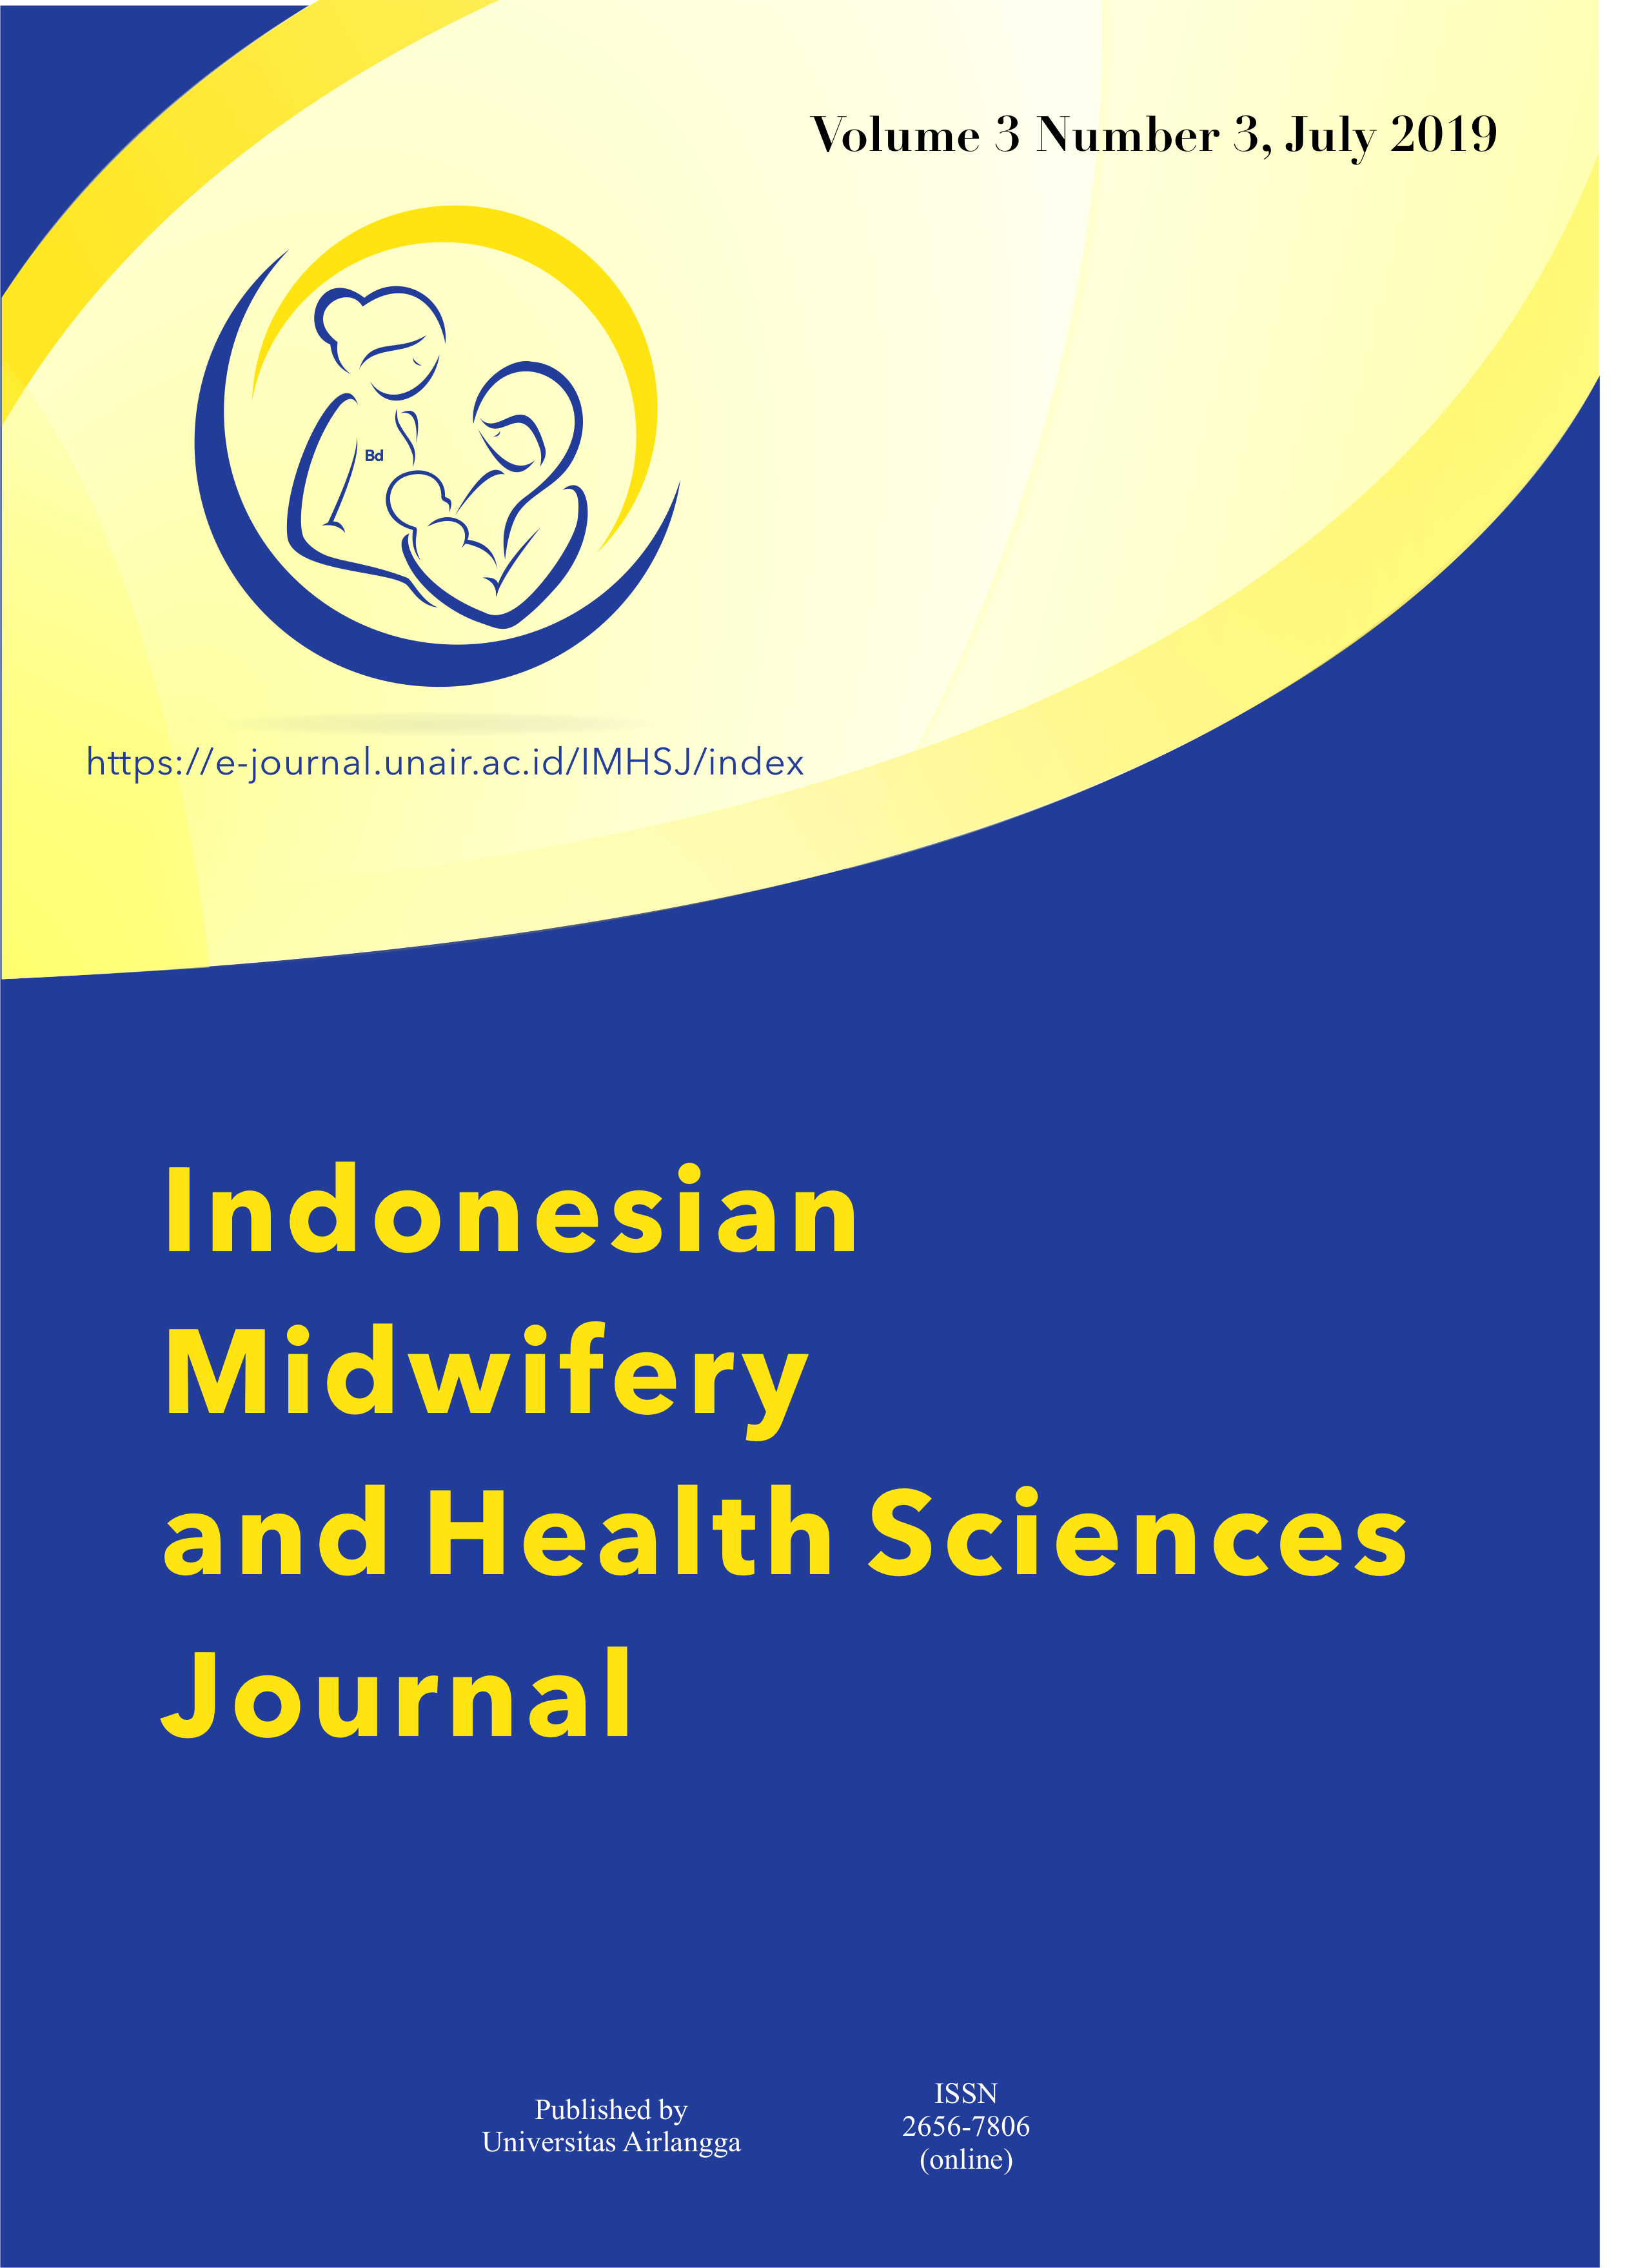 						View Vol. 3 No. 3 (2019): Indonesian Midwifery and Health Sciences Journal, July 2019
					